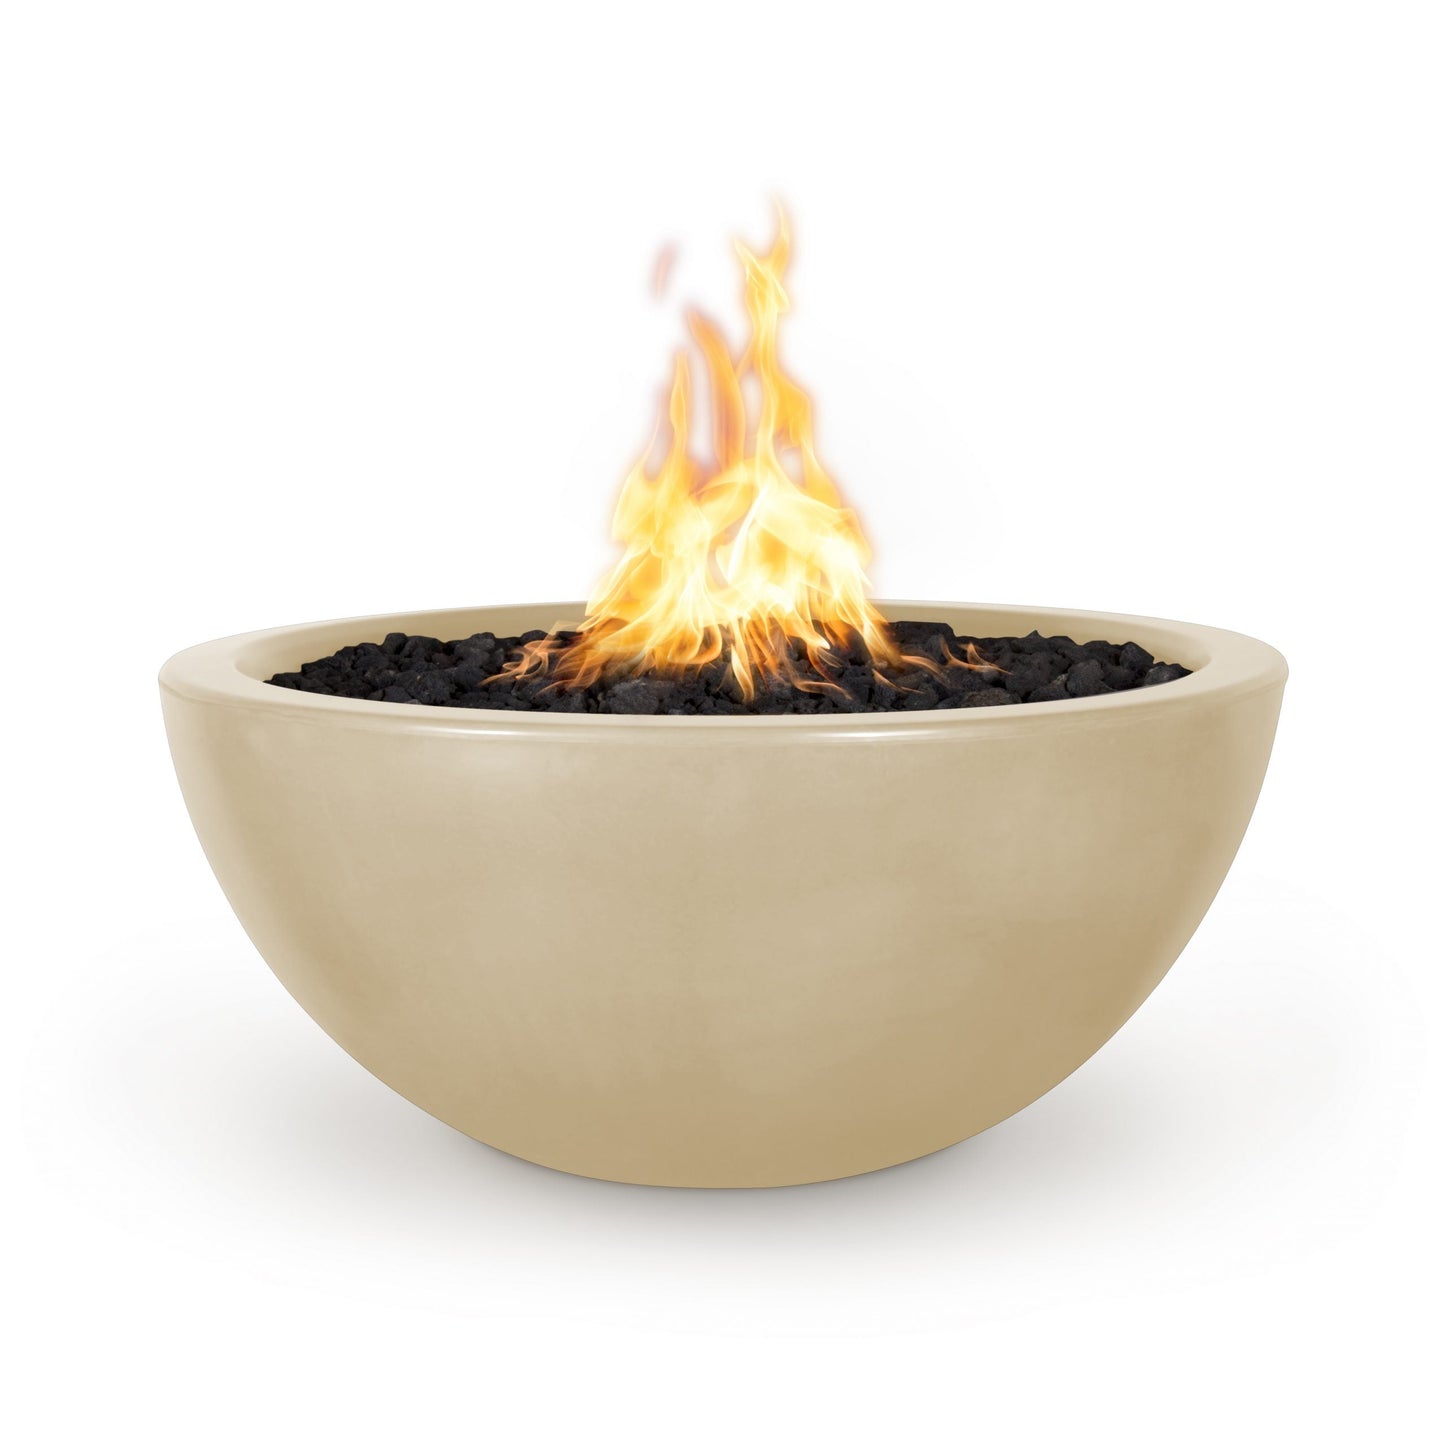 The Outdoor Plus Round Luna 30" Metallic Slate GFRC Concrete Natural Gas Fire Bowl with Match Lit with Flame Sense Ignition